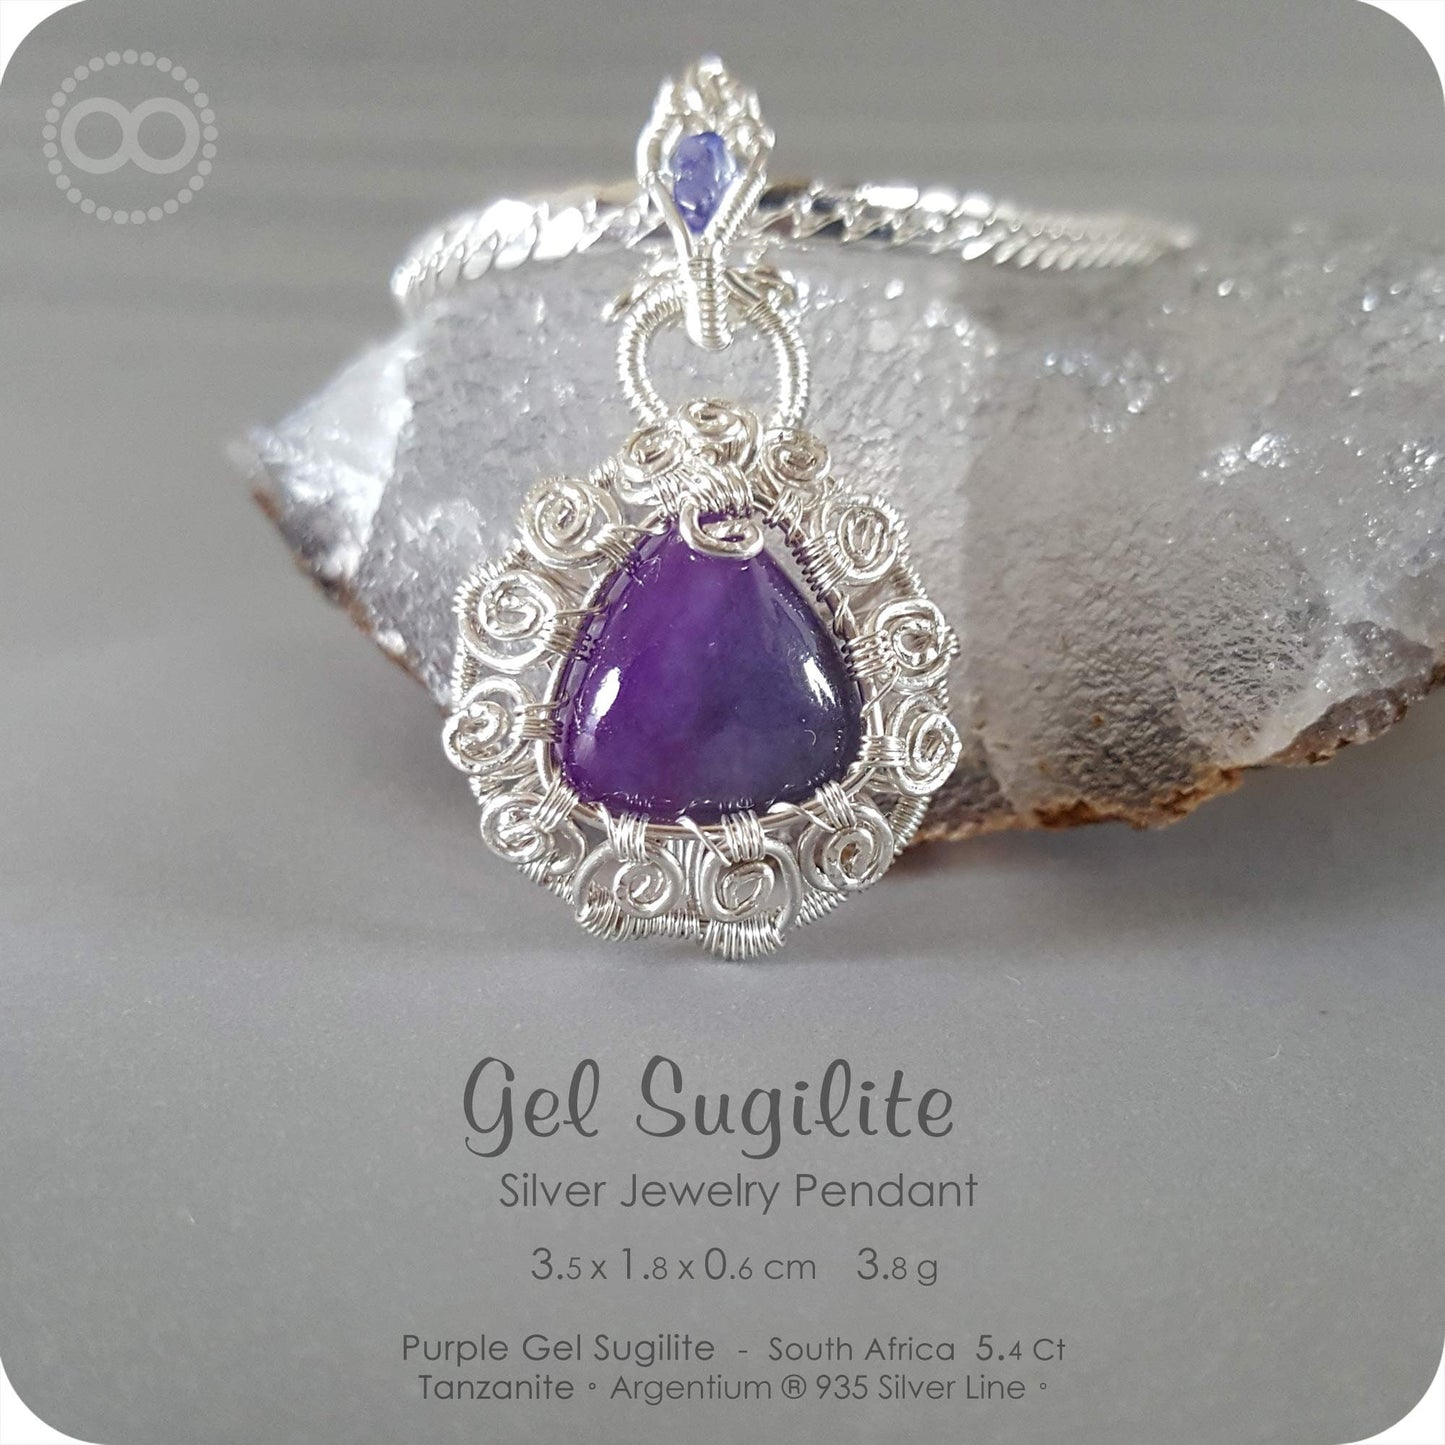 Gel Sugilite Silver Jewelry Necklace - H106